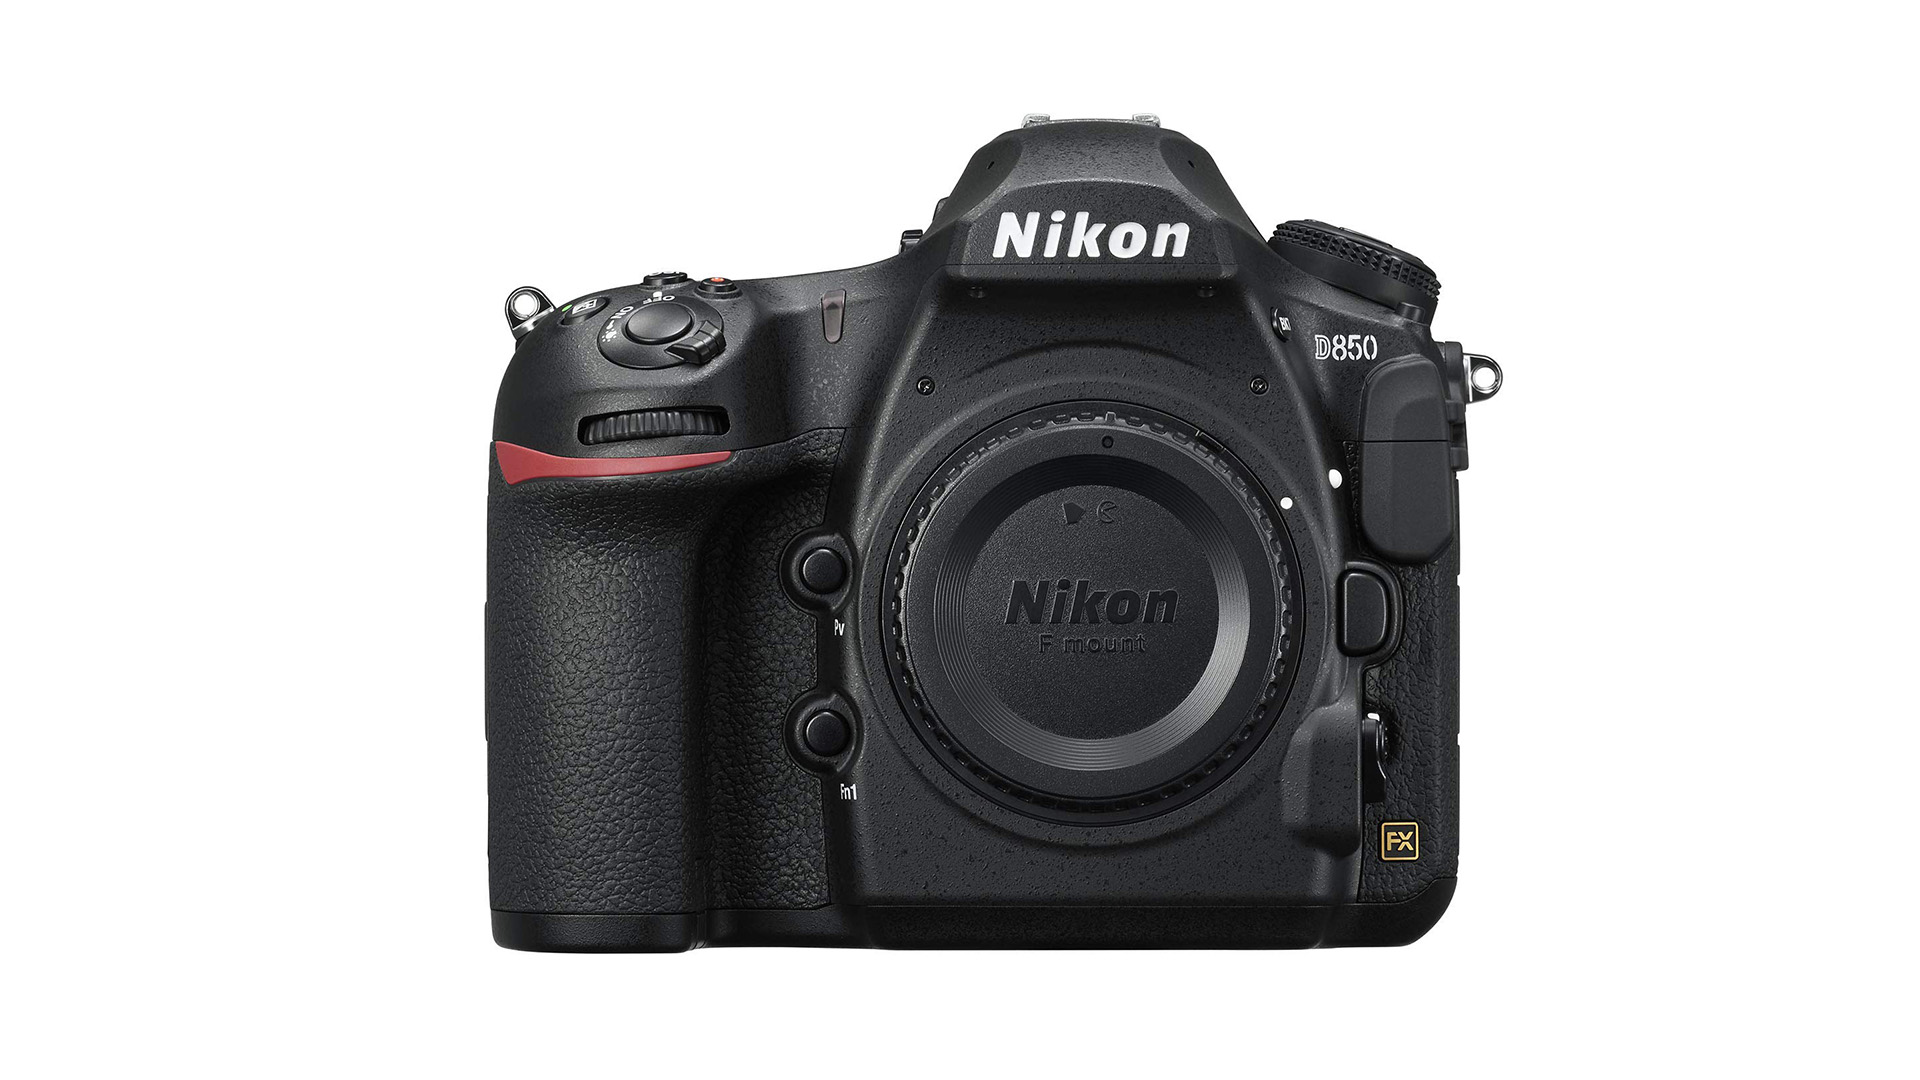 Save $200 on the Nikon D850 an impressive DSLR camera for professionals Space pic